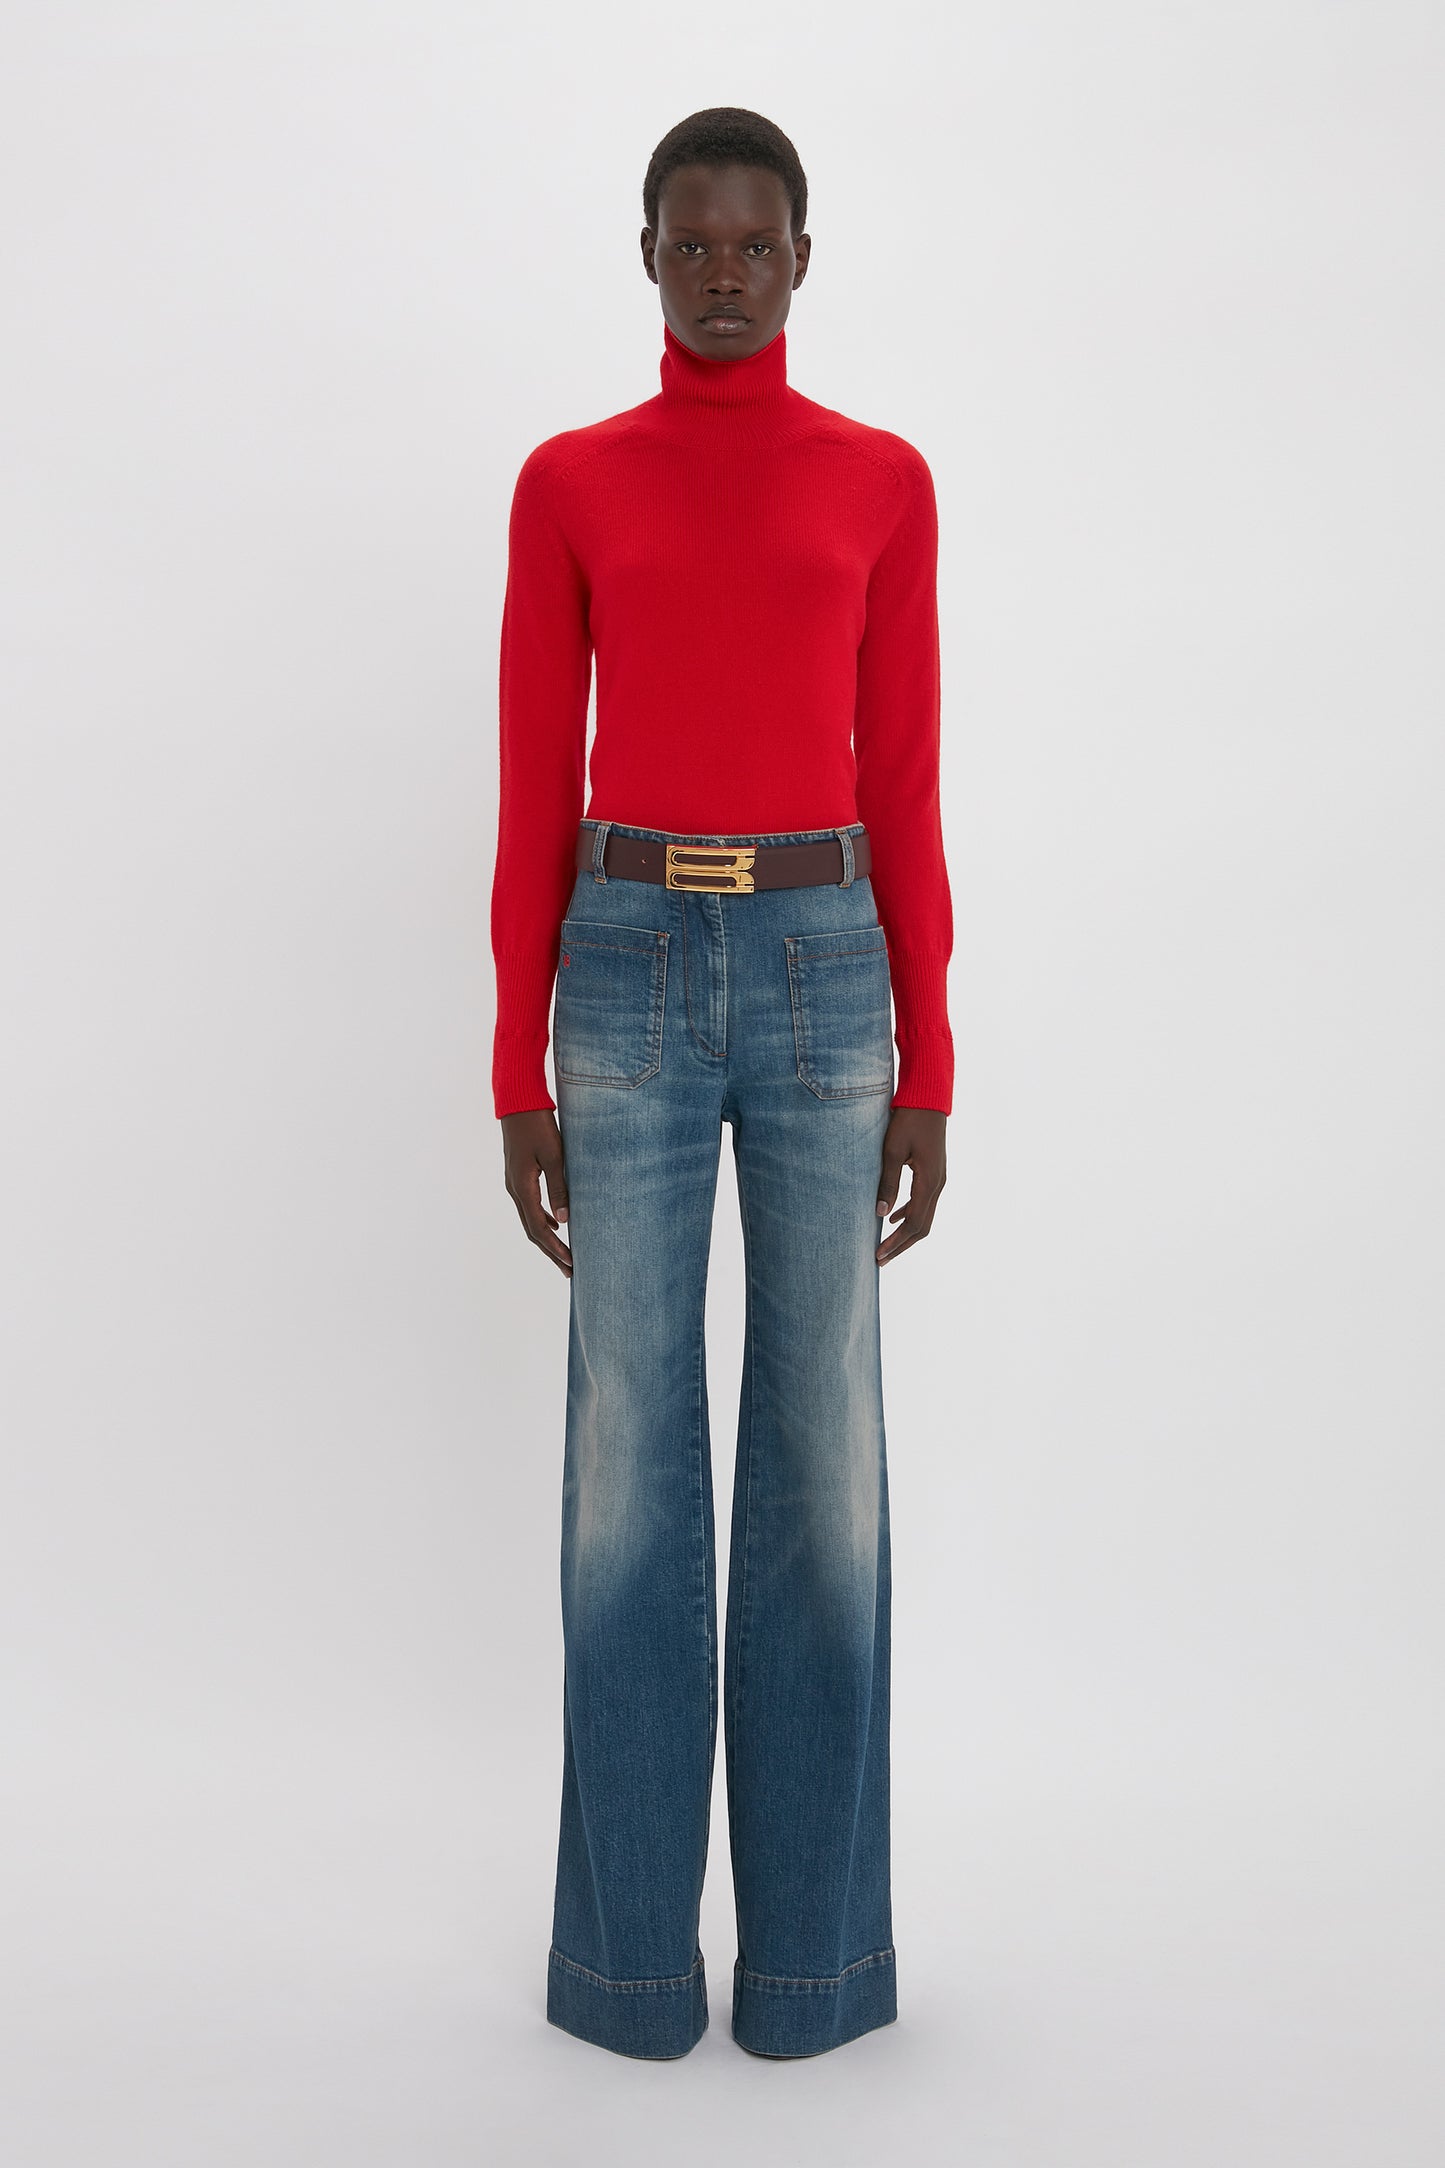 A black woman stands against a white background, wearing a red turtleneck sweater, Victoria Beckham's Alina Jean in Heavy Vintage Indigo Wash, and a brown belt.